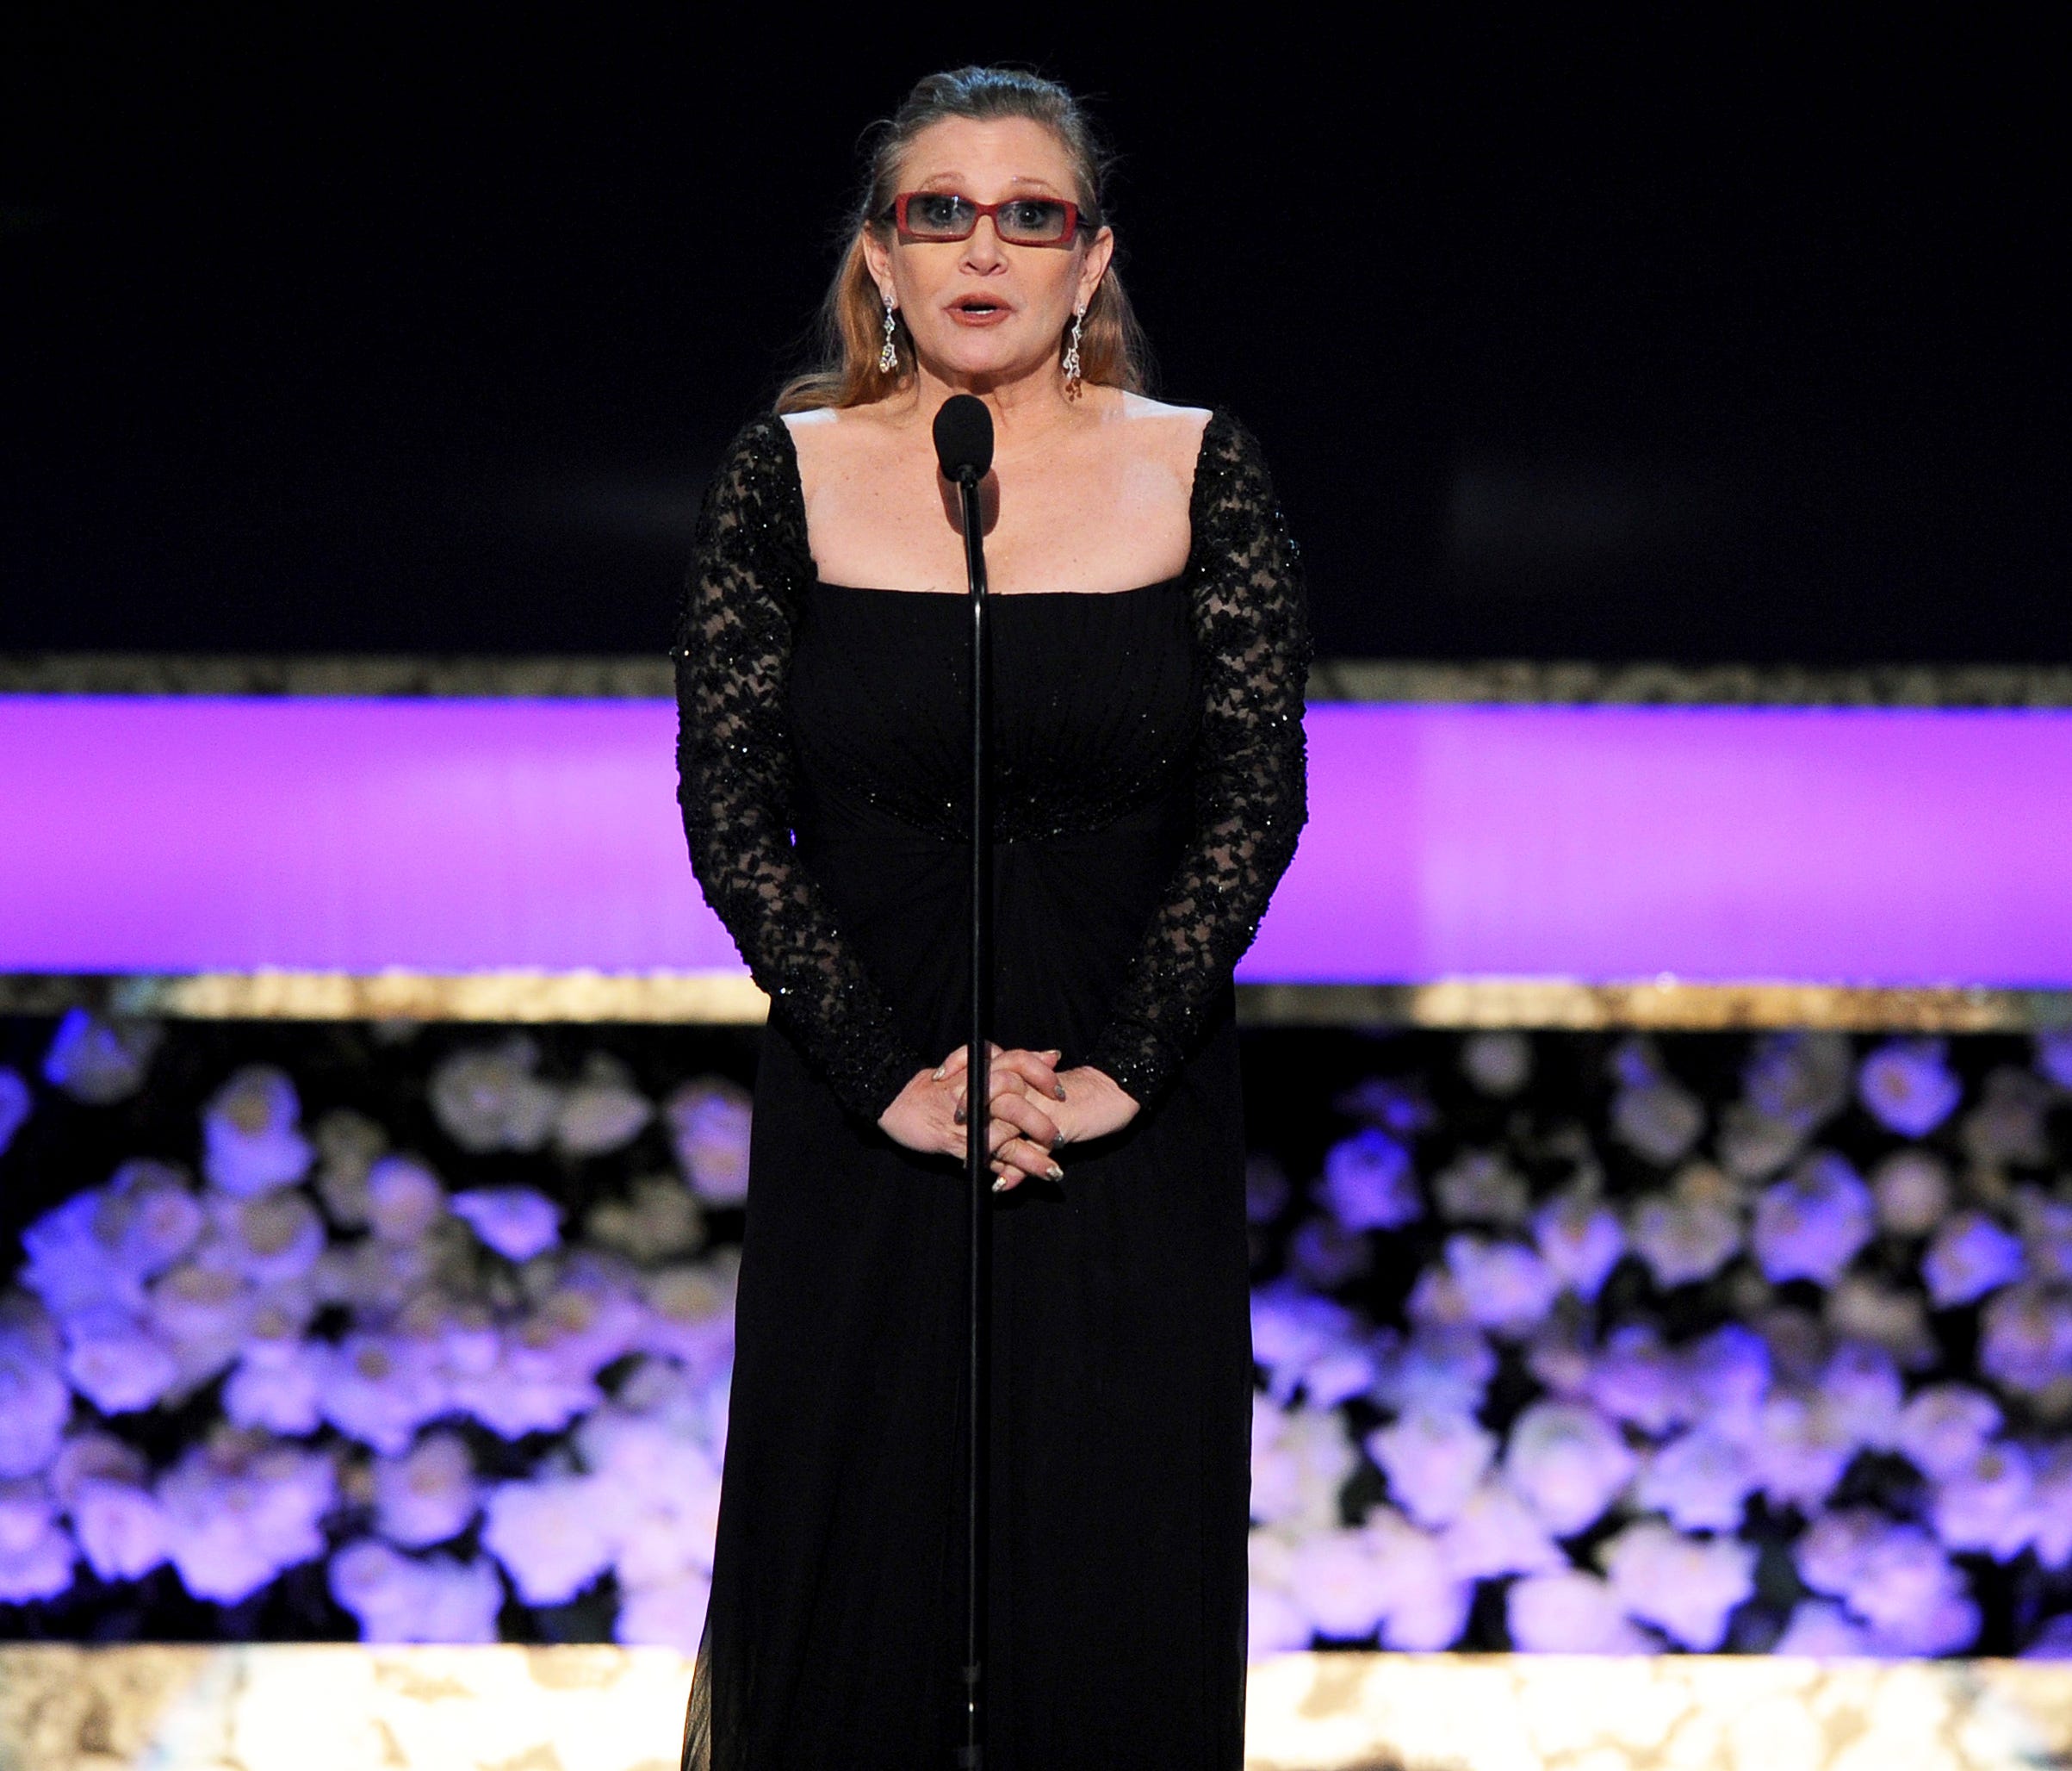 Carrie Fisher in January 2015 at the Screen Actors Guild Awards in Los Angeles.